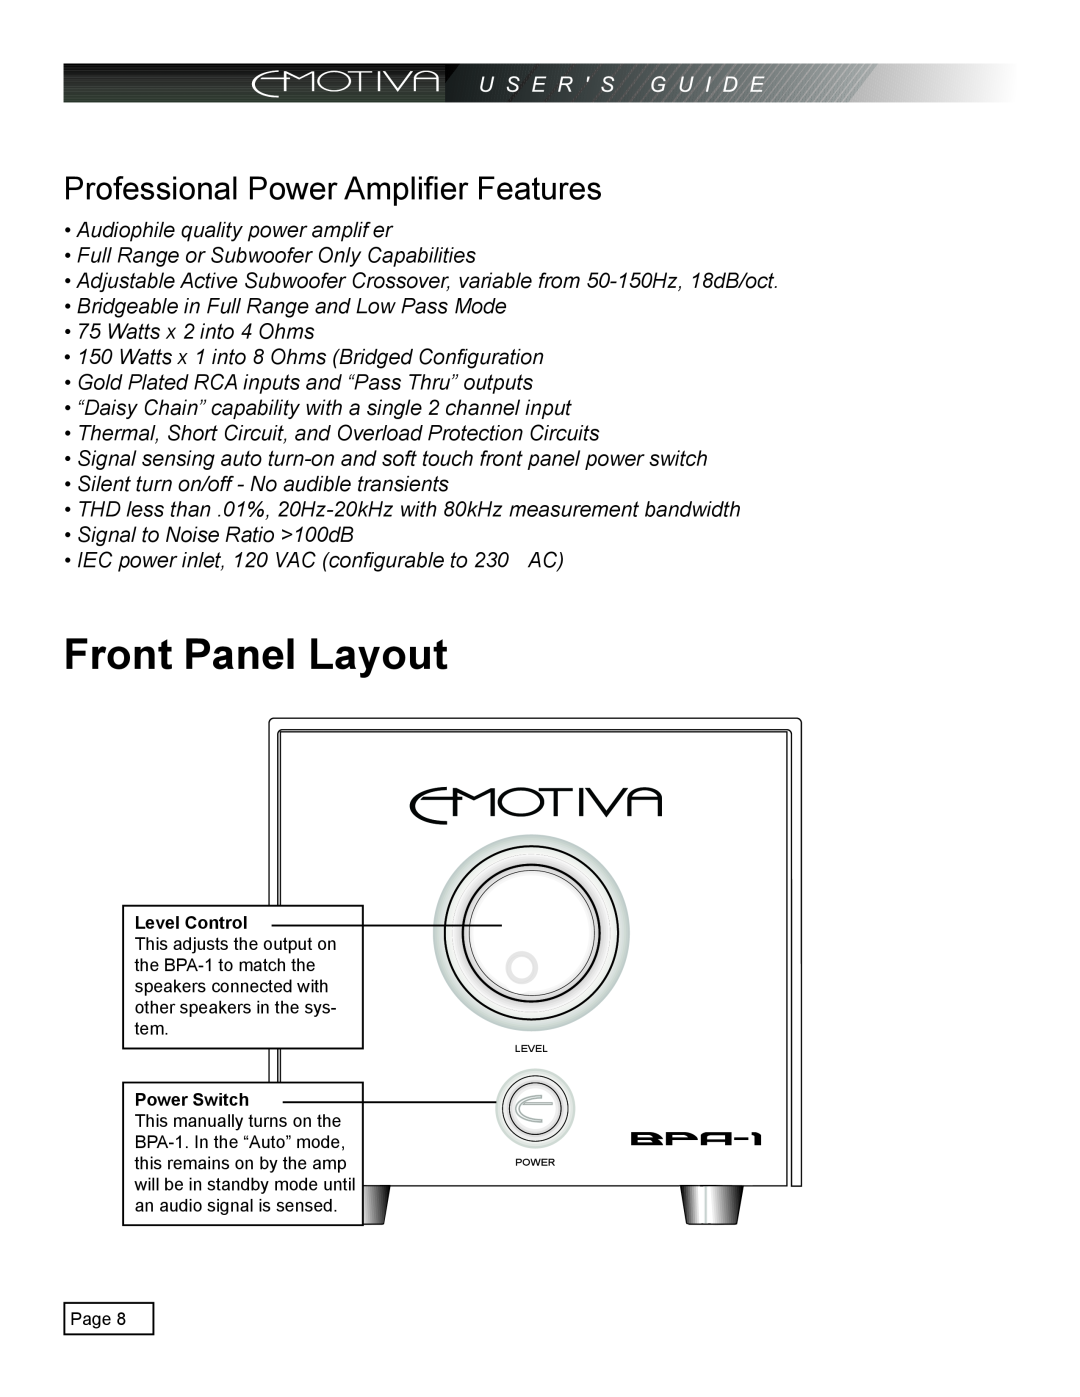 Emotiva pmn manual Front Panel Layout, Professional Power Amplifier Features 